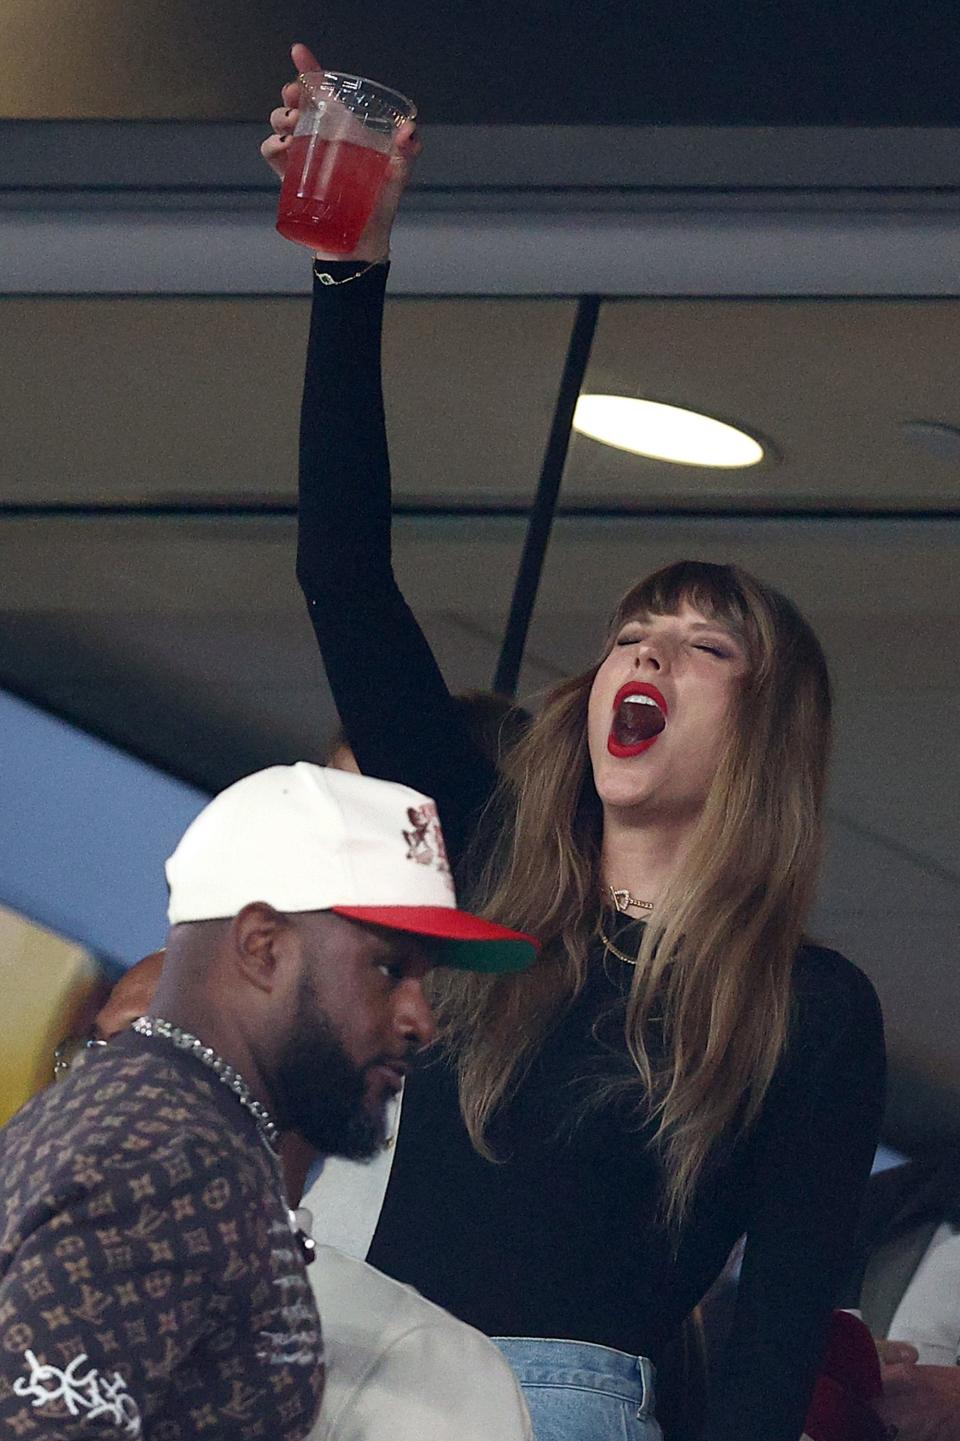 Taylor Swift was in the game day spirit to kick off the game.